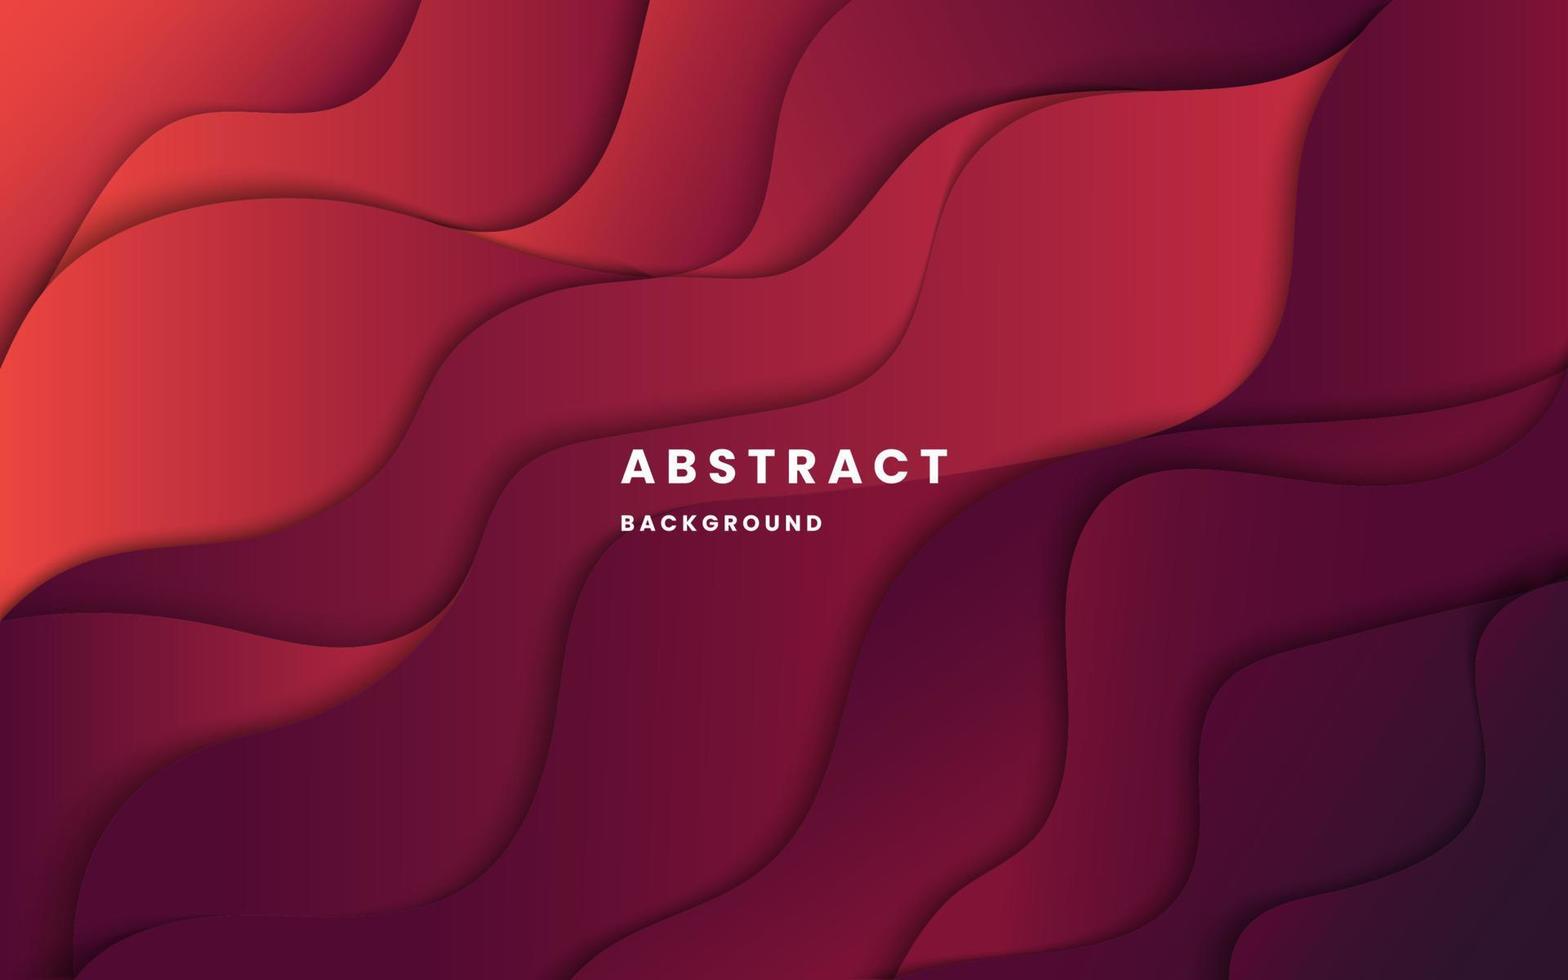 Liquid dynamic shapes abstract composition. red to purple  gradient background dynamic wavy light and shadow. liquid abstract background. modern elegant design background. illustration vector 10 eps.